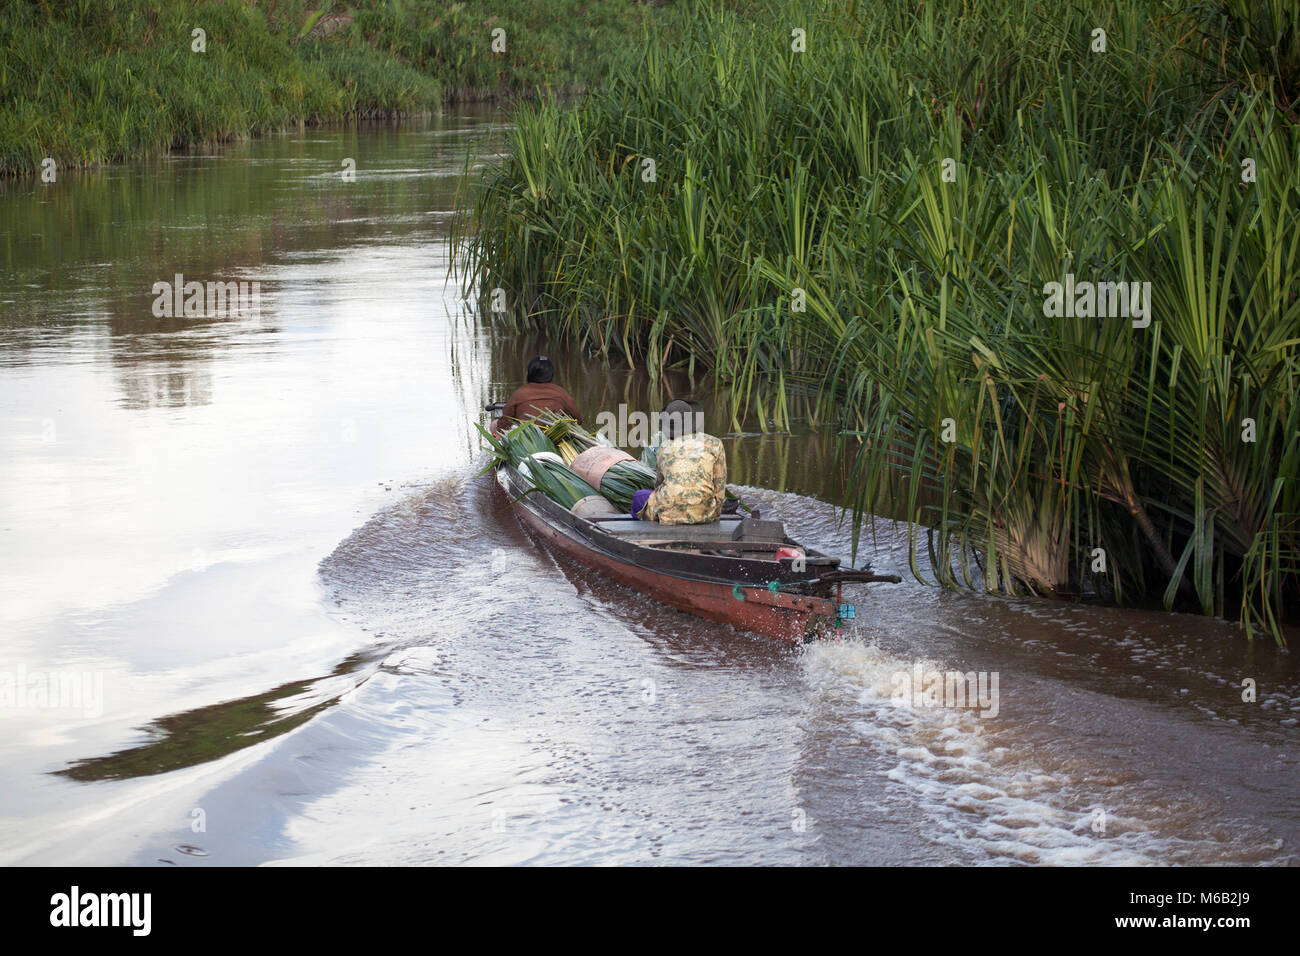 Indonesians transporting harvested Nipa Palm fronds (Nypa fruticans) by boat along the Sekonyer River in Central Kalimantan, Borneo Stock Photo